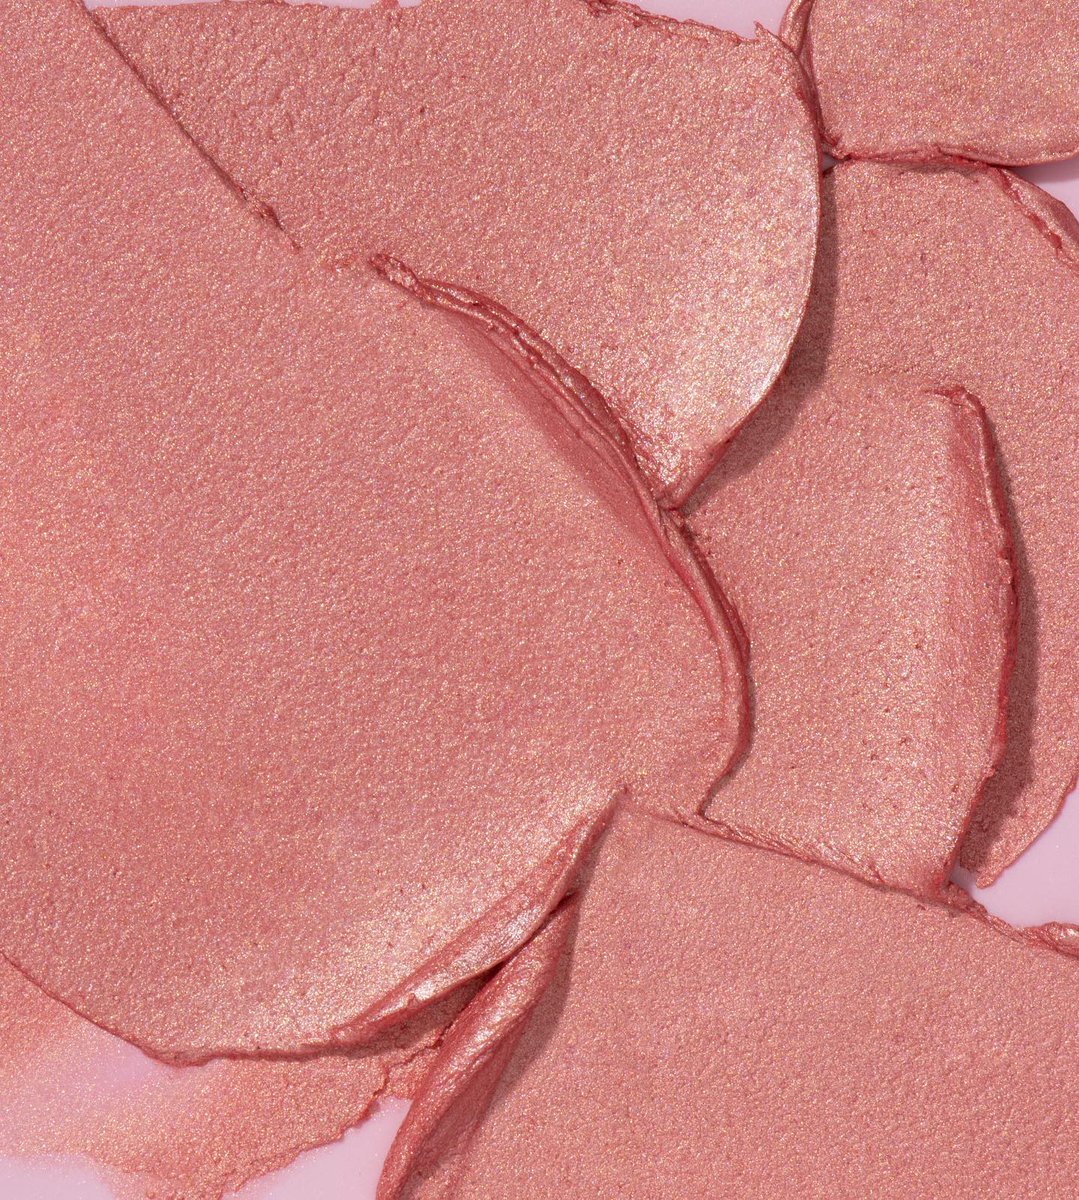 We have an unhealthy obsession with Stick Blush in shade Bubblegum, a shimmering light pink 😍✨Use it as a blush, highlight or lip color for a natural flush of color 💫 #AnastasiaBeverlyHills